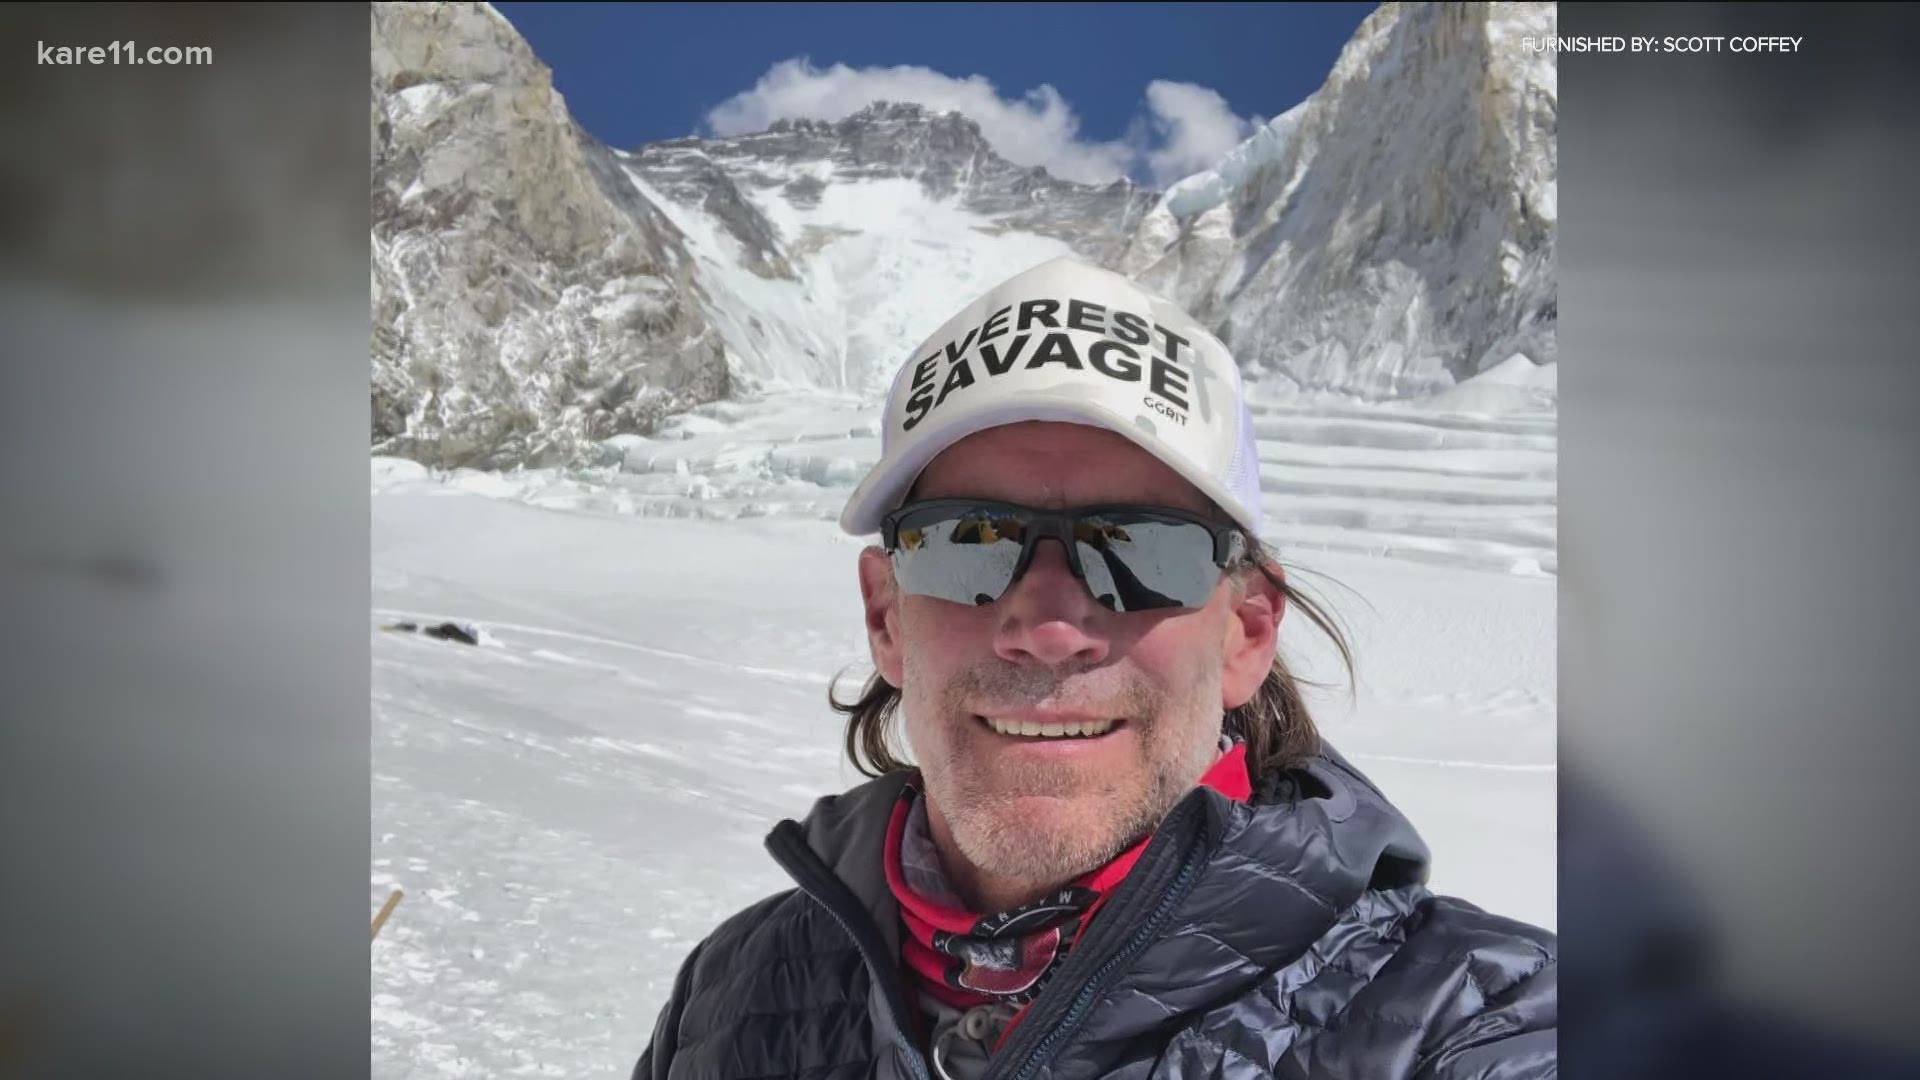 Scott Coffey was waiting in base camp when he got word that the Sherpas had COVID